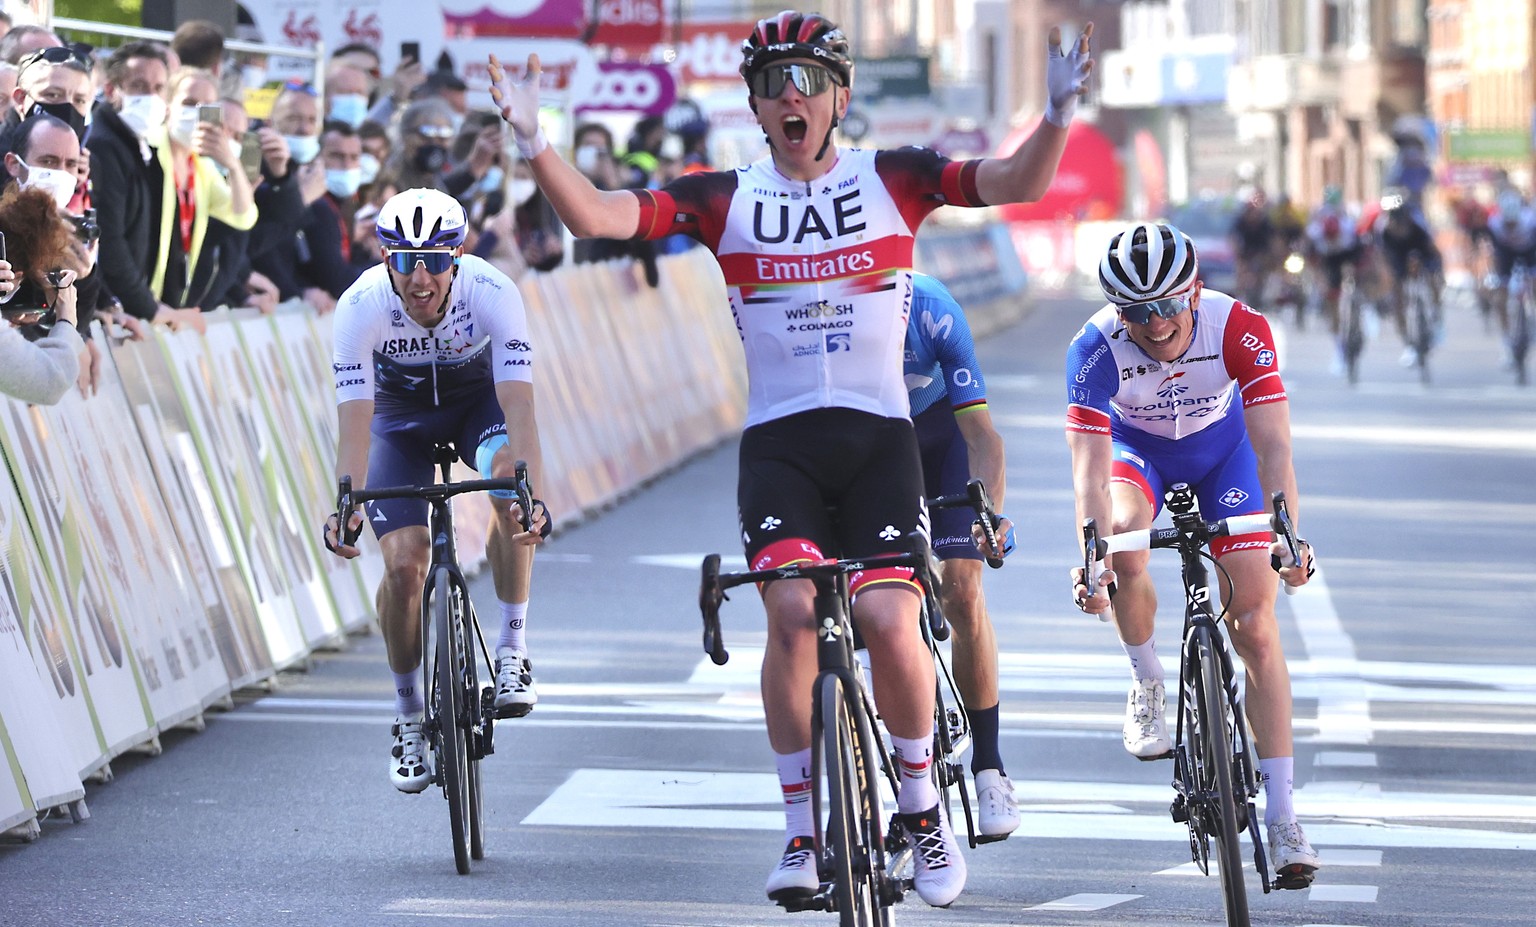 Slovenia&#039;s Tadej Pogacar, center, of the UAE team Emirates crosses the finish line to win the Belgian cycling classic and UCI World Tour cycling race Liege Bastogne Liege, in Liege, Belgium, Sund ...